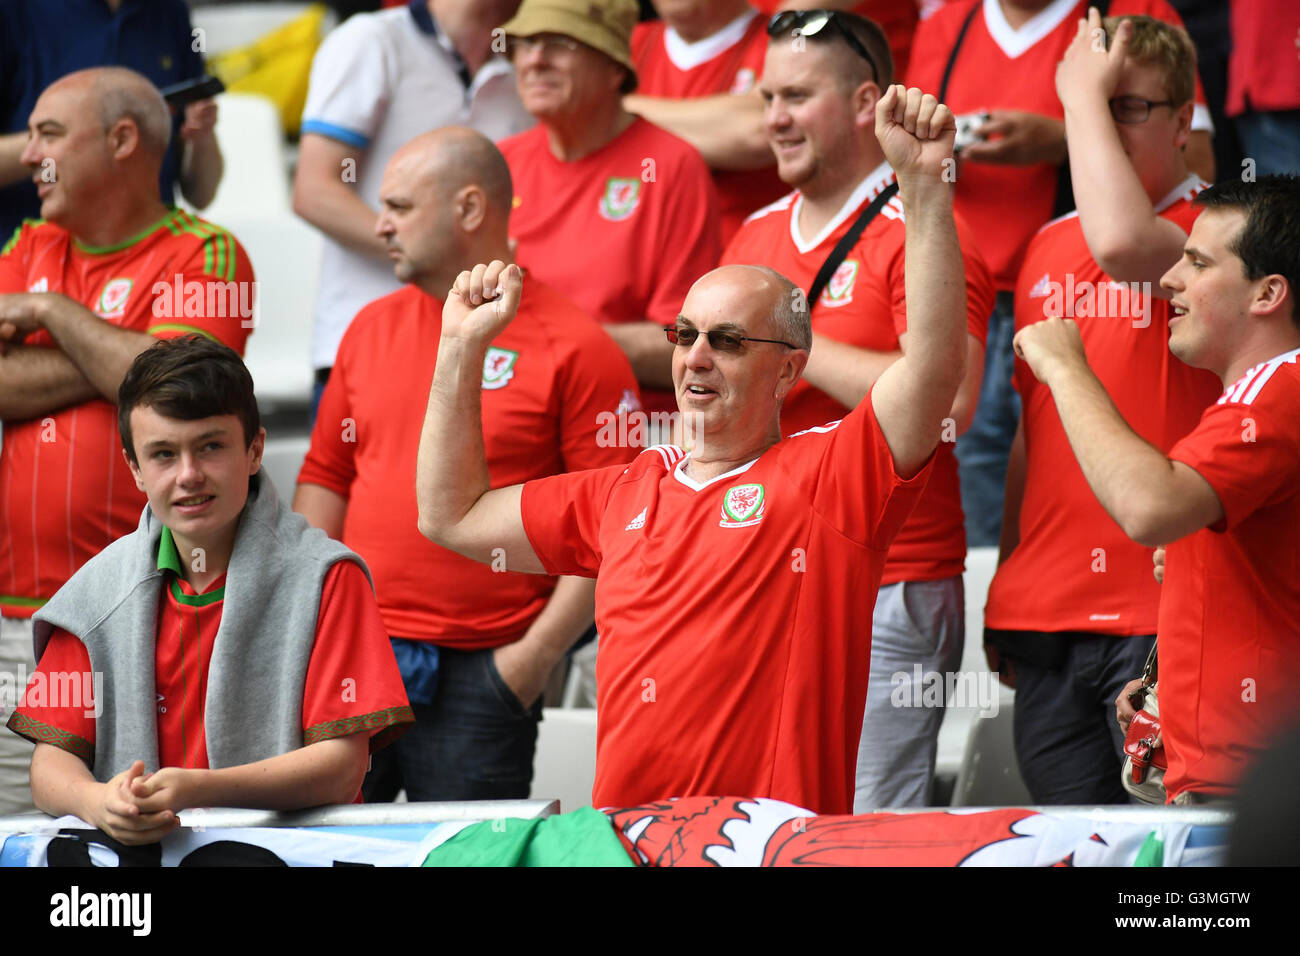 Welsh football fans in high spirits ahead of kick off  before Wales v Slovakia in their Euro 2016 Group B fixture at the Matmut Atlantique , Nouveau Stade de Bordeaux  in Bordeaux, France on Saturday 11th June 2016. Stock Photo